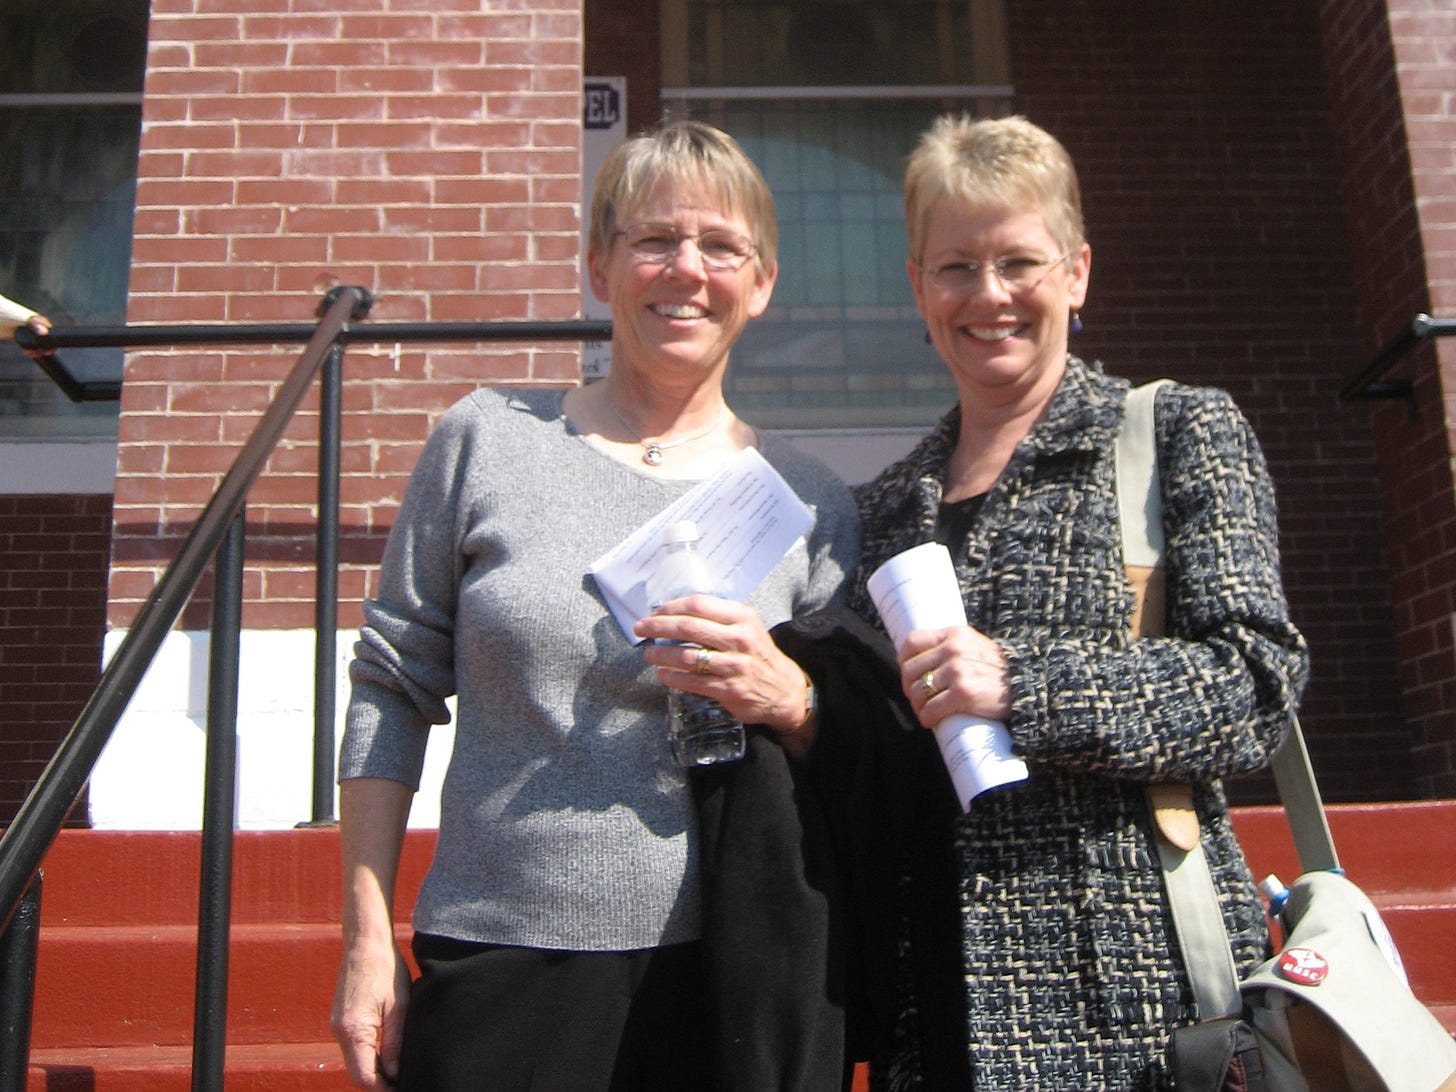 Two woman with short cropped blond hair standing on the steps of a church